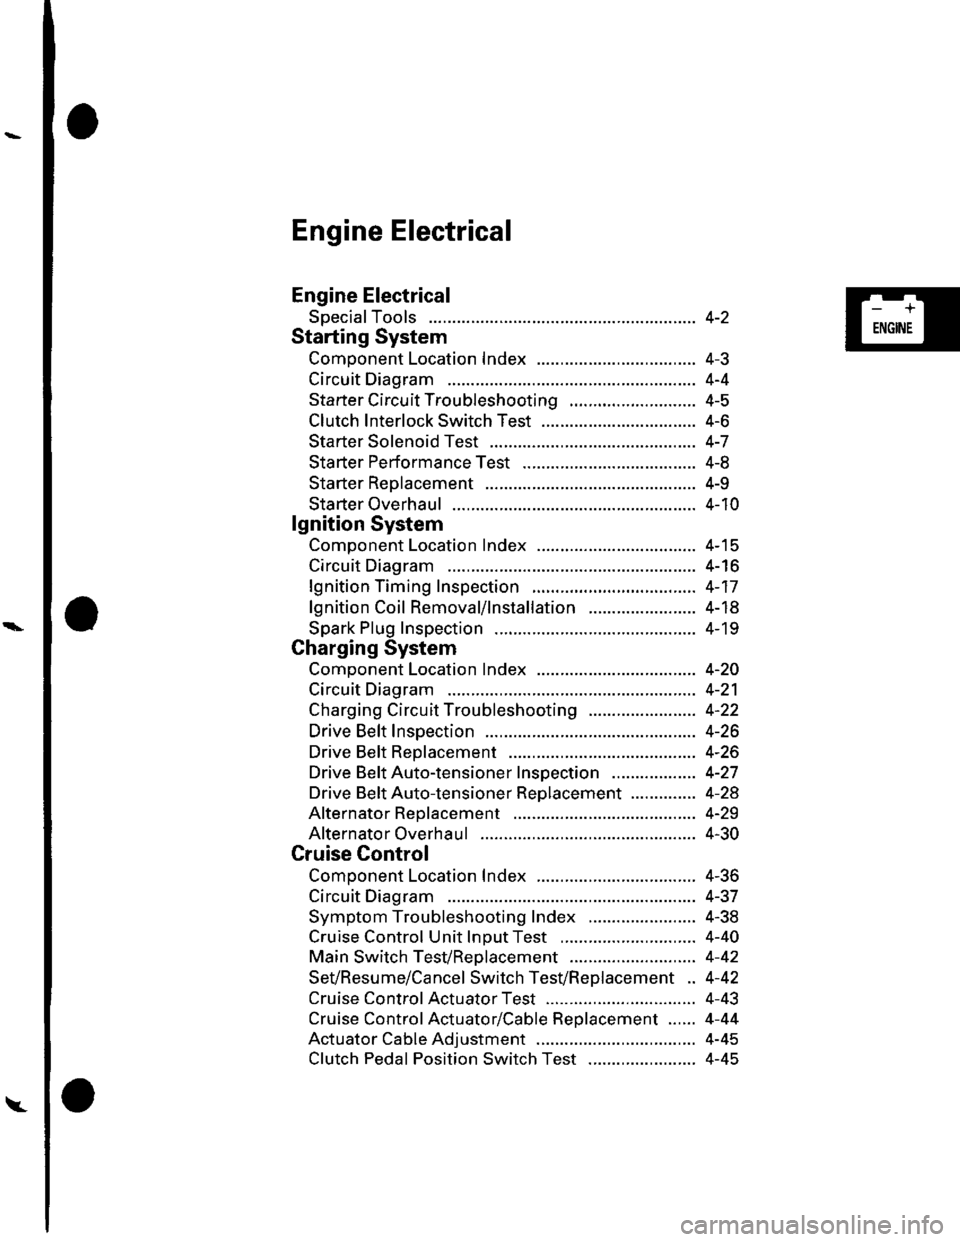 HONDA CIVIC 2003 7.G User Guide \.
Engine Electrical
Engine Electrical
SpecialTools
Starting System
Comoonent Location Index ...............
Circuit Diagram
Starter Circu it Troubleshooting
Clutch Interlock Switch Test
Starter Solen